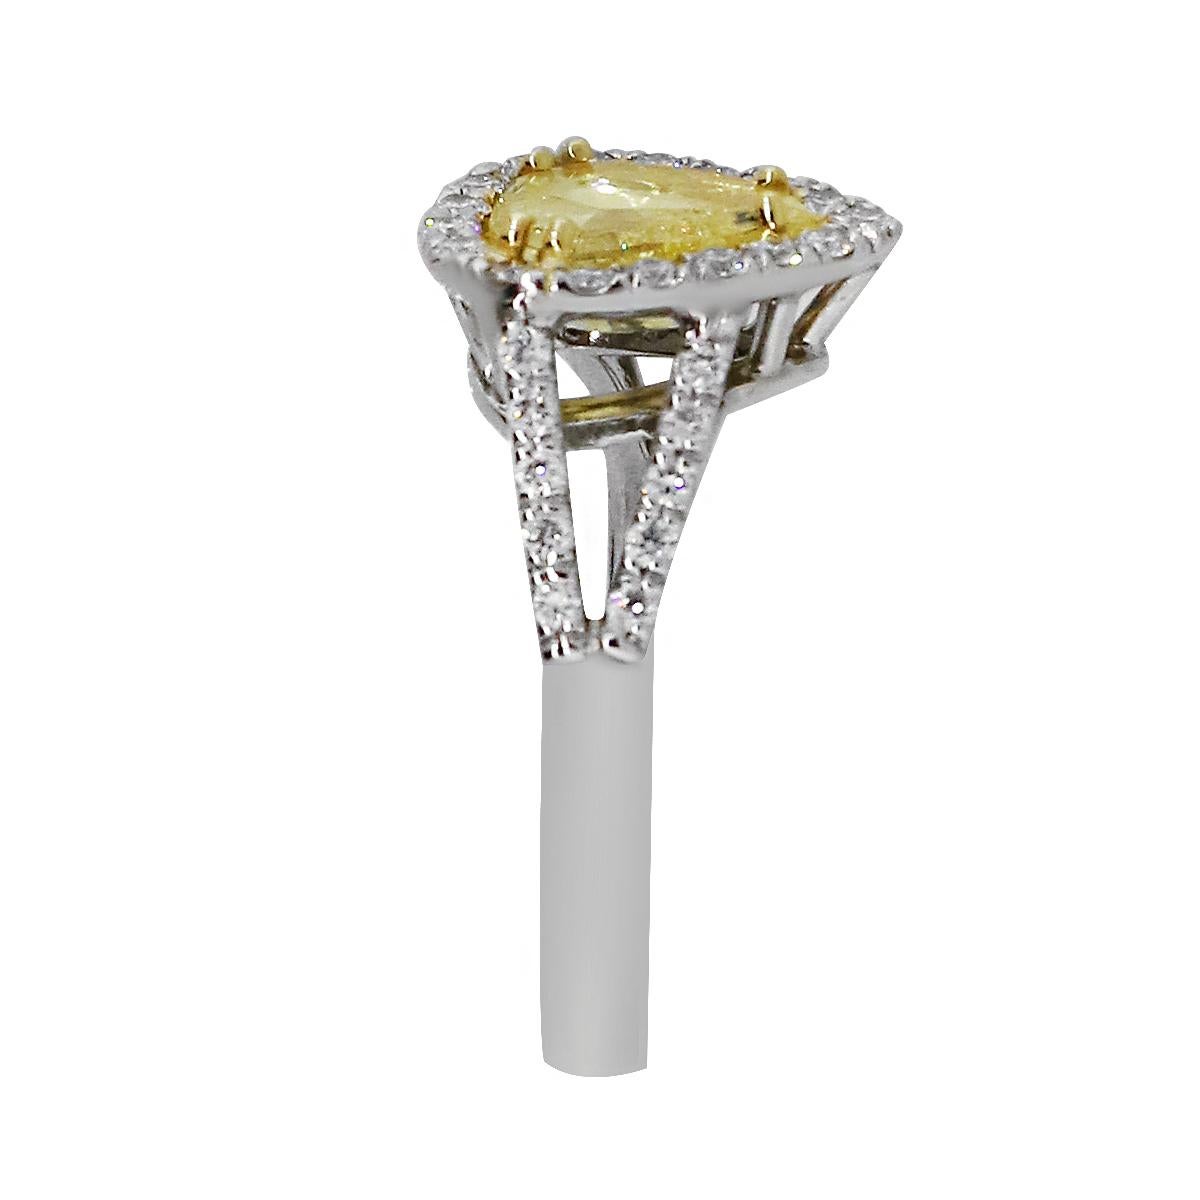 Material: 18k White Gold and Platinum
Center Diamond Details: Approximately 1ctw pear shape fancy yellow diamond. Center diamond is I1 in color and NFIY in clarity.
GIA Certificate: #2191289681
Accent Diamond Details: Approximately 0.54ctw round